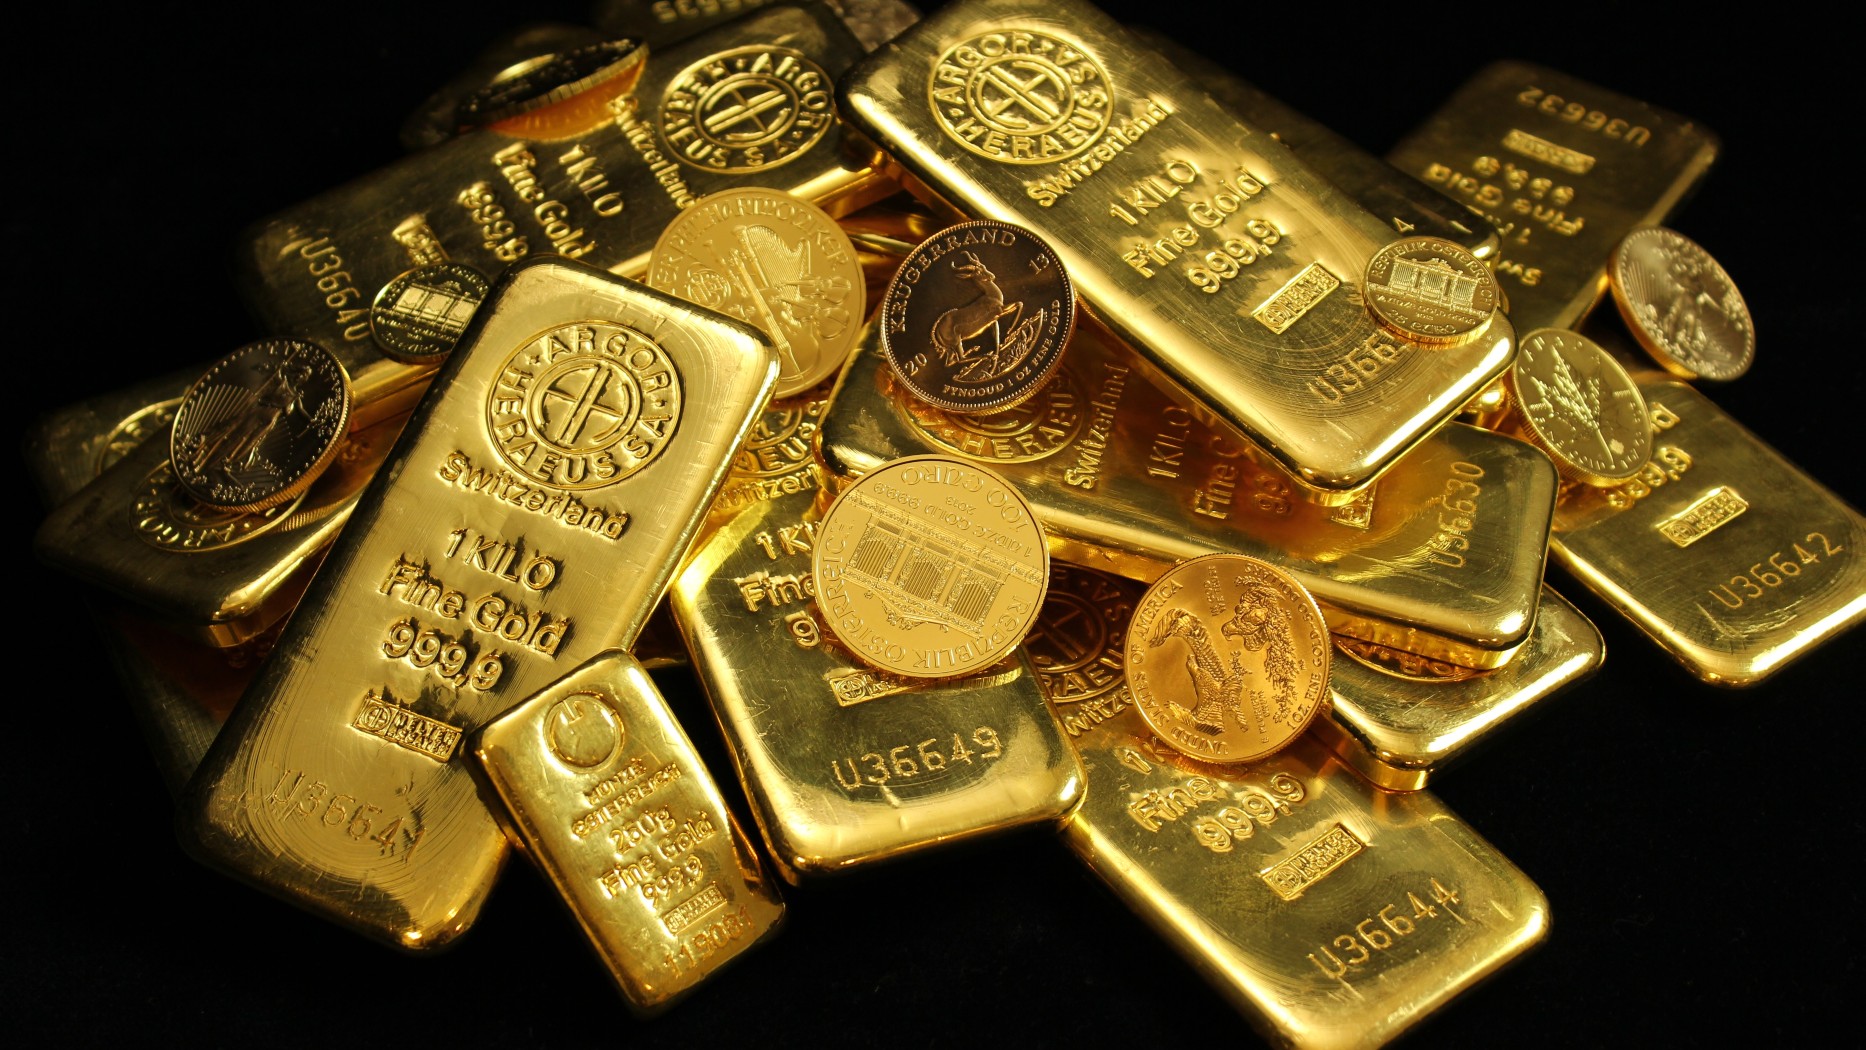 Egypt: Gold-buying mania as national currency loses value Middle East Eye